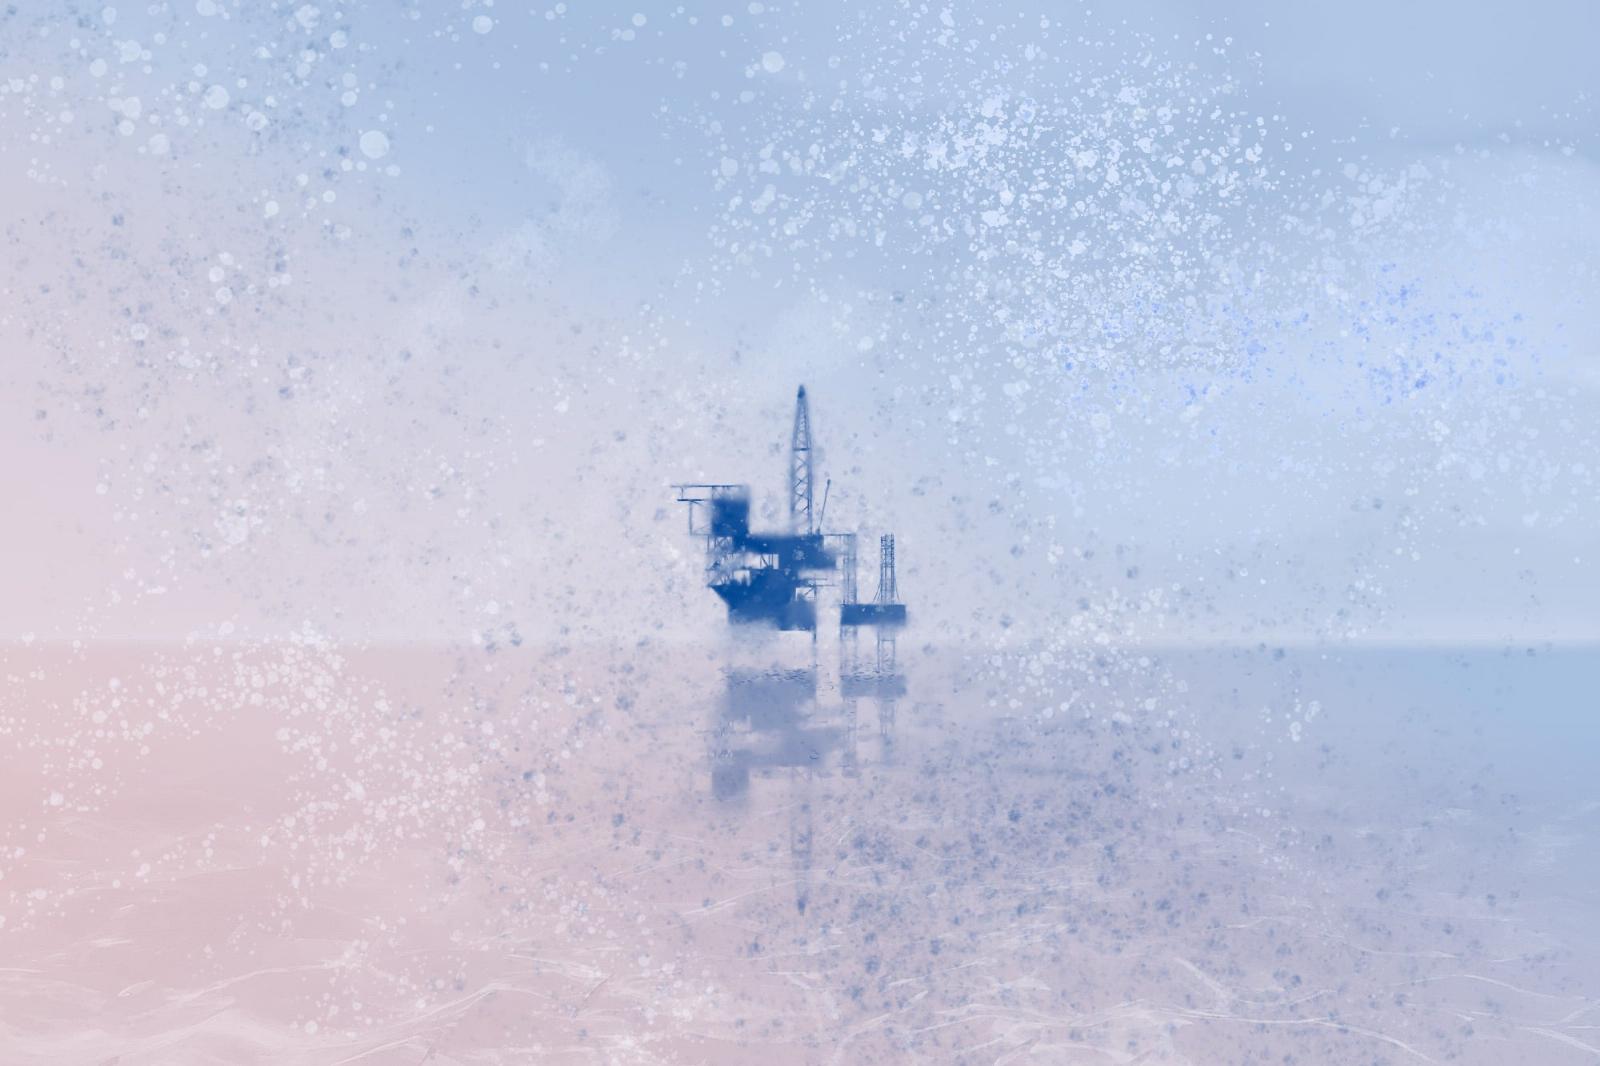 What if Oil Platforms Belonged to the People Who Worked on Them?